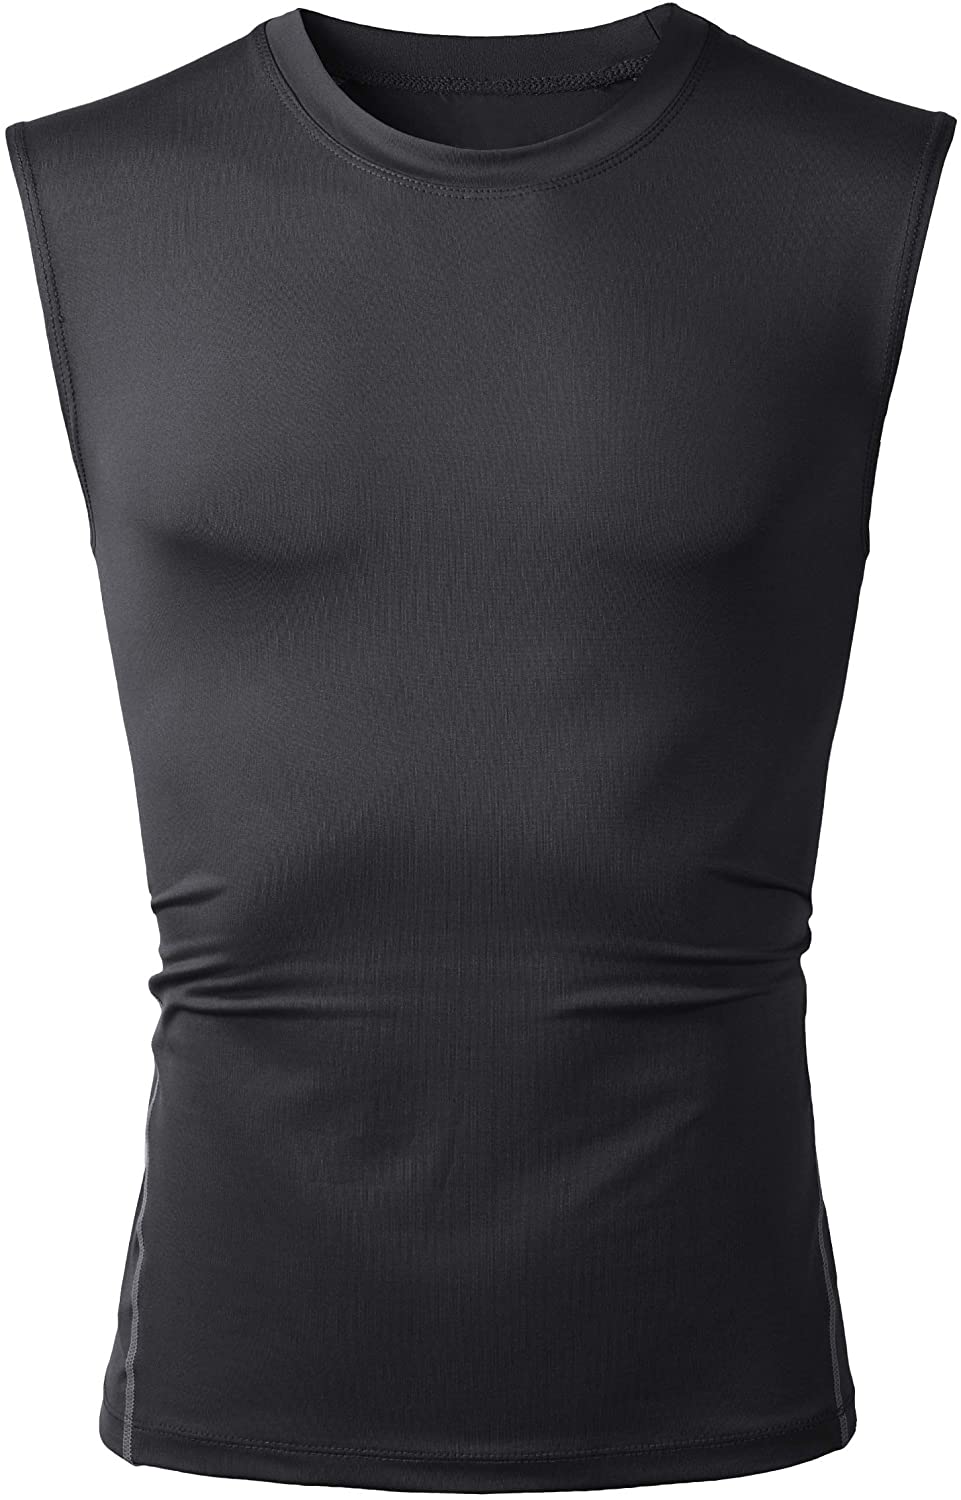 Beninos Mens 2 Pack Athletic Compression Under Base Layer Sport Tank Top